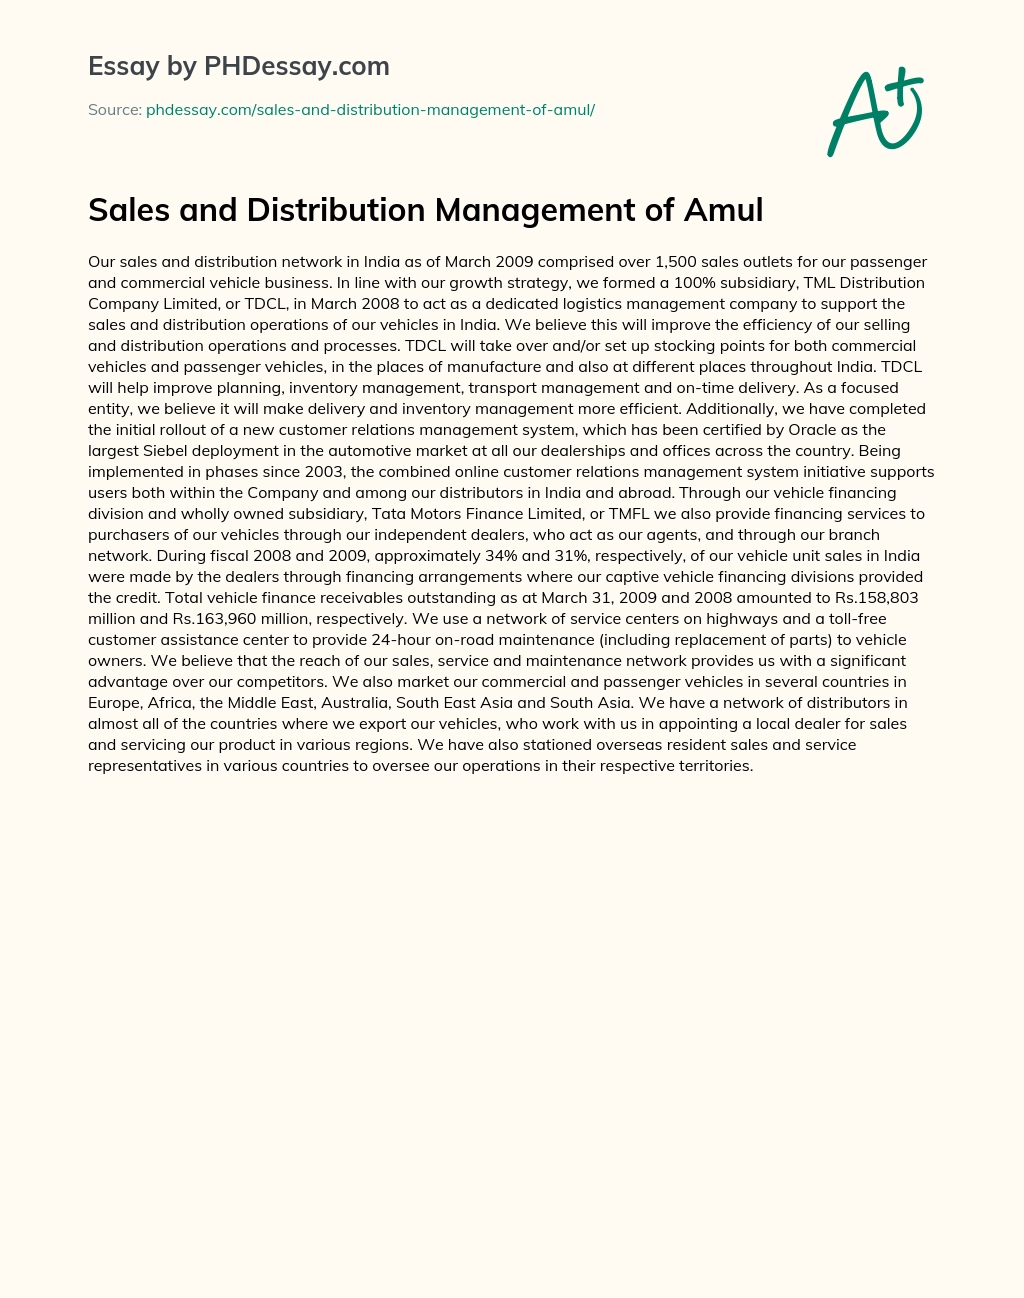 Sales and Distribution Management of Amul essay